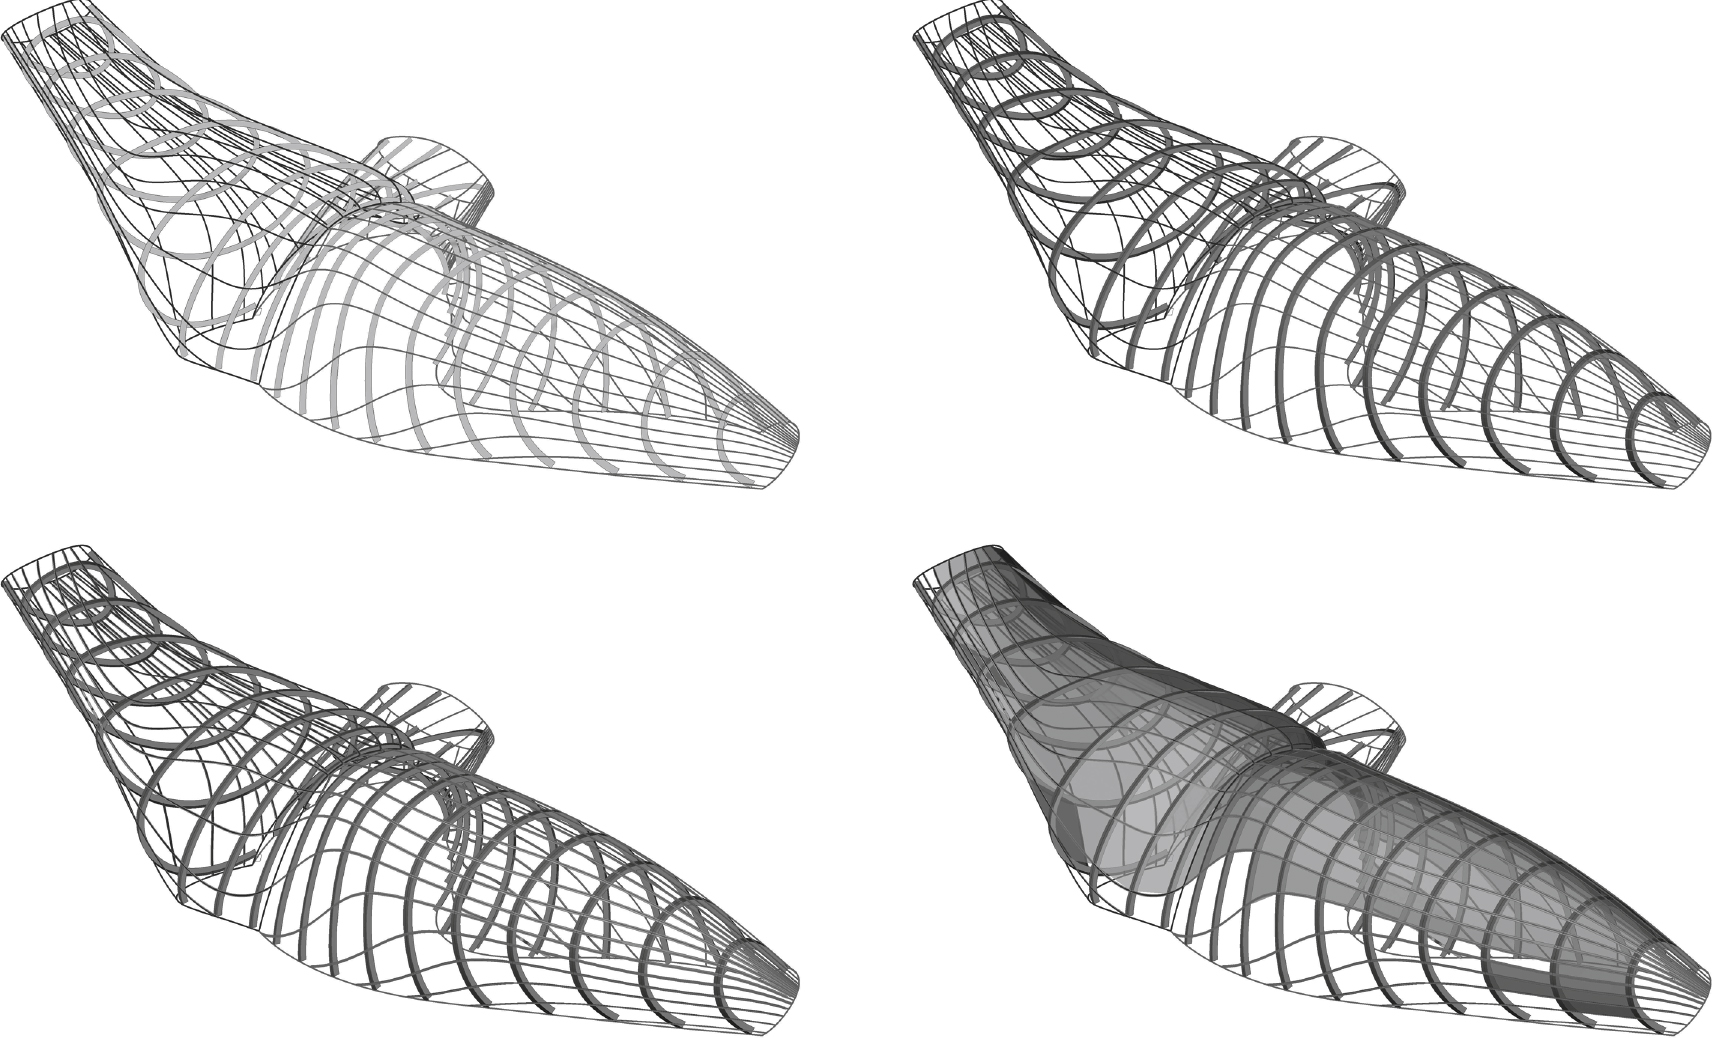 Graphic resolution of a surface that is not continuous. Contour curves arrangement, planar conjugated sections supporting principal structure and approaching to the envelopments using planar quadrilateral facets.